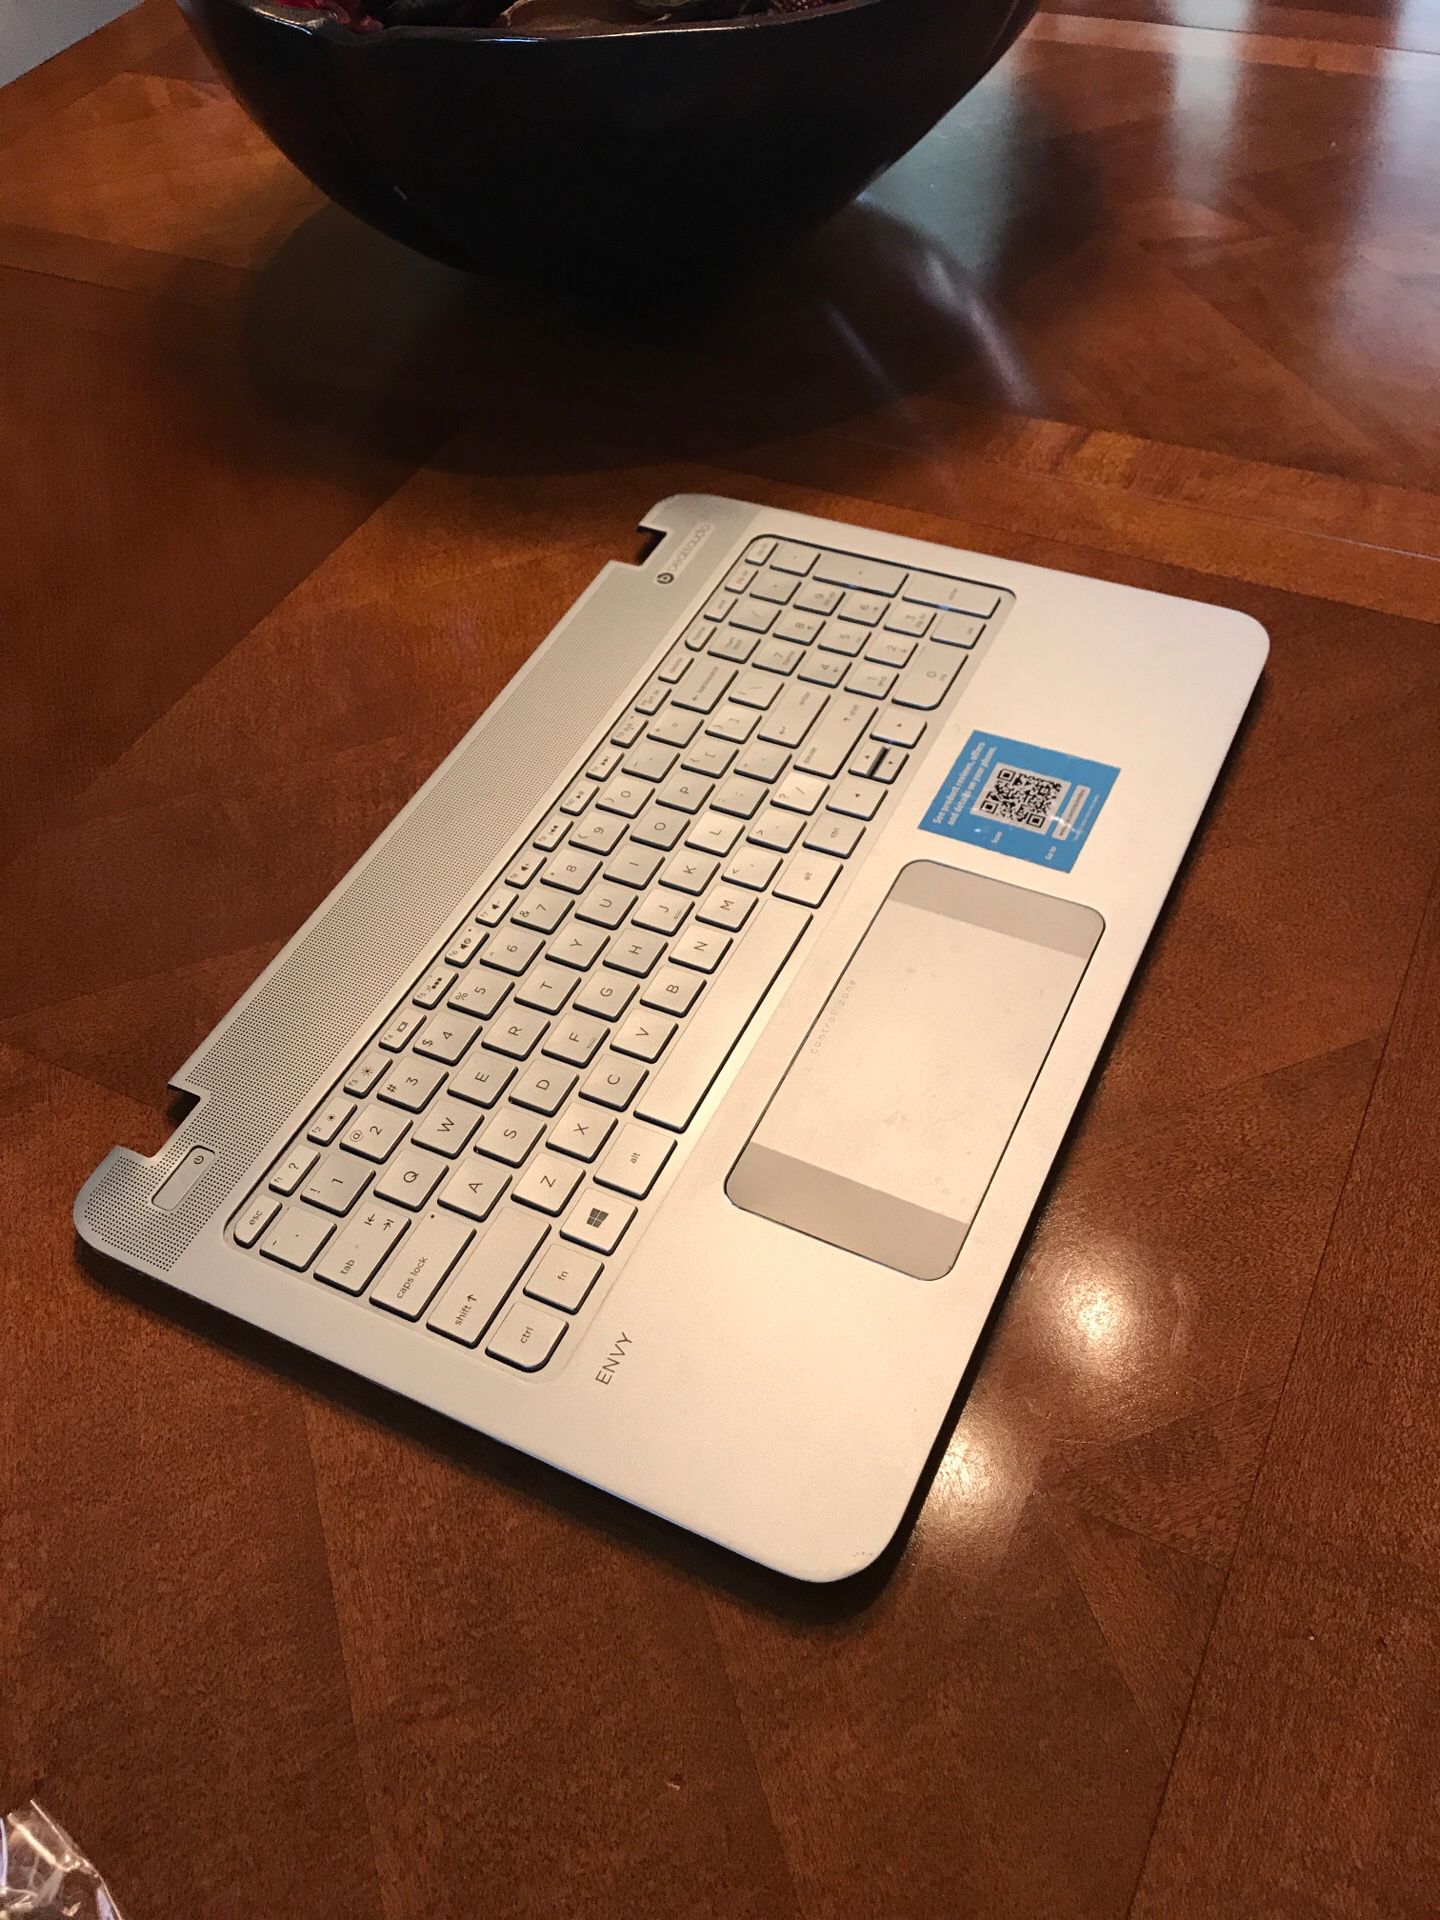 HP Envy M6 - Top Cover with Keyboard & Trackpad.